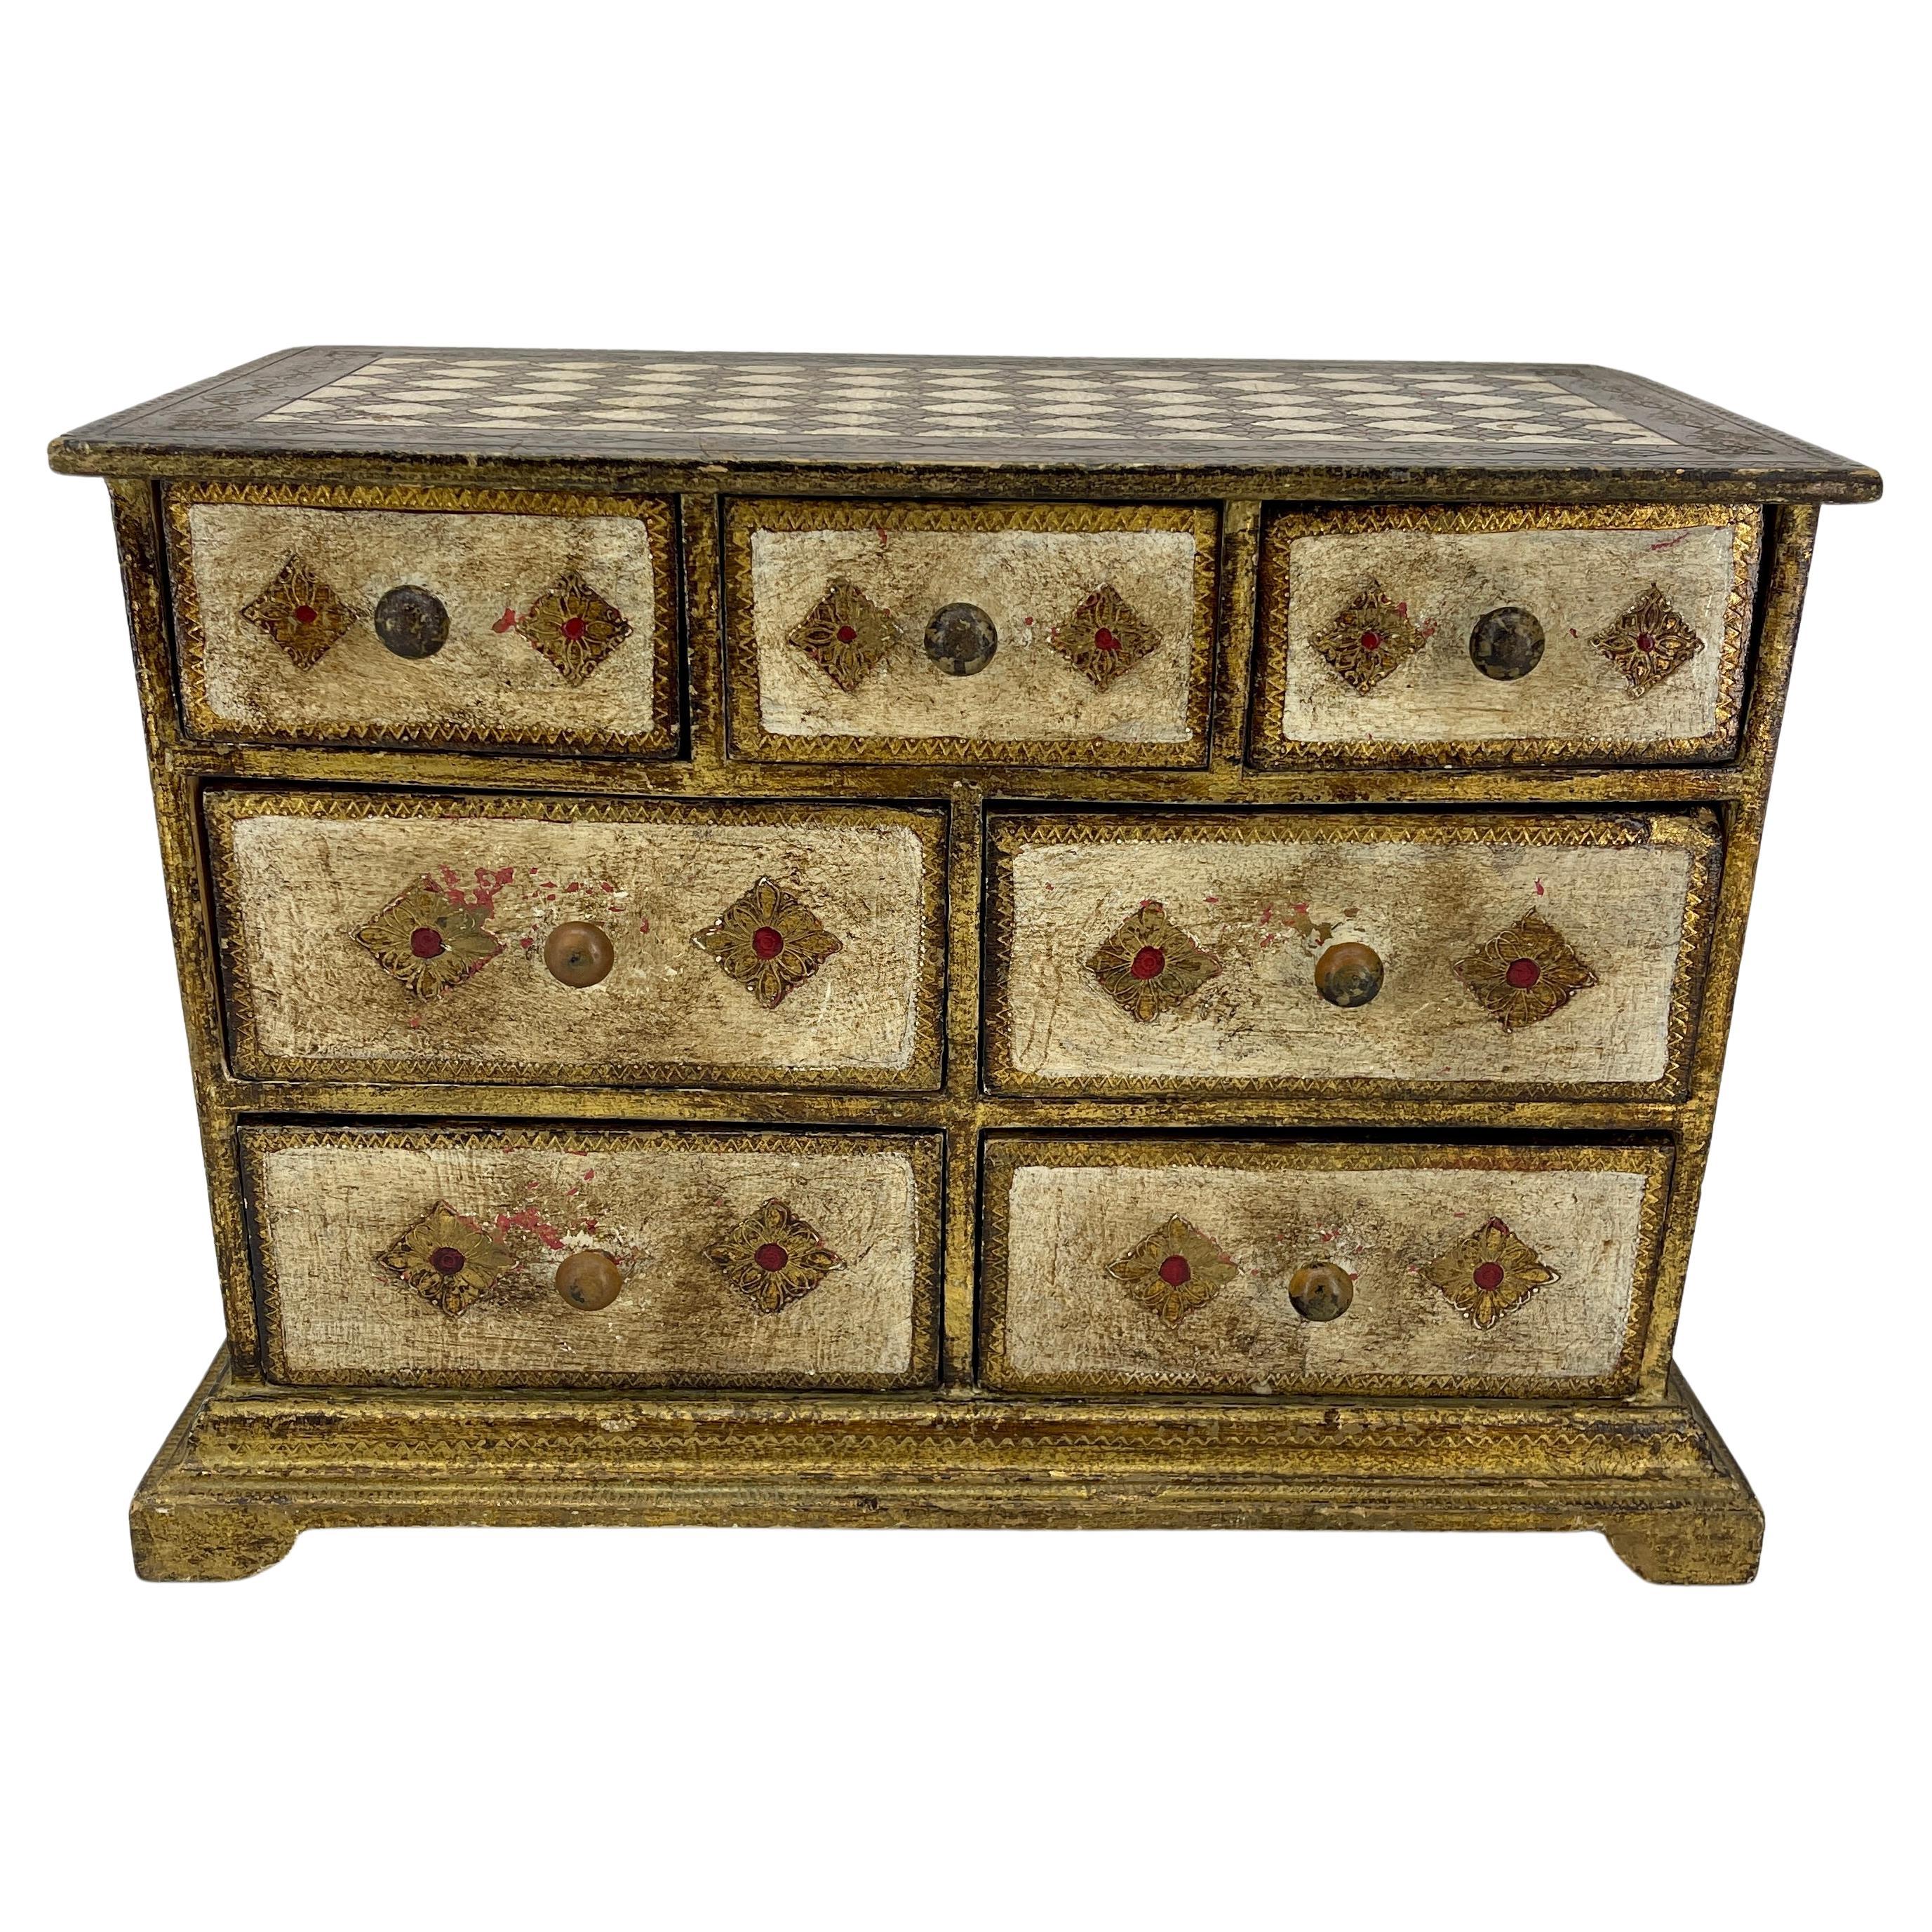 Italian Florentine Jewelry Box or Miniature Chest of Drawers

This 1950's vintage gilt wood piece, lined in velvet with seven drawers has lots of character and patina. Wonderful piece to add to a collection or start a new one.